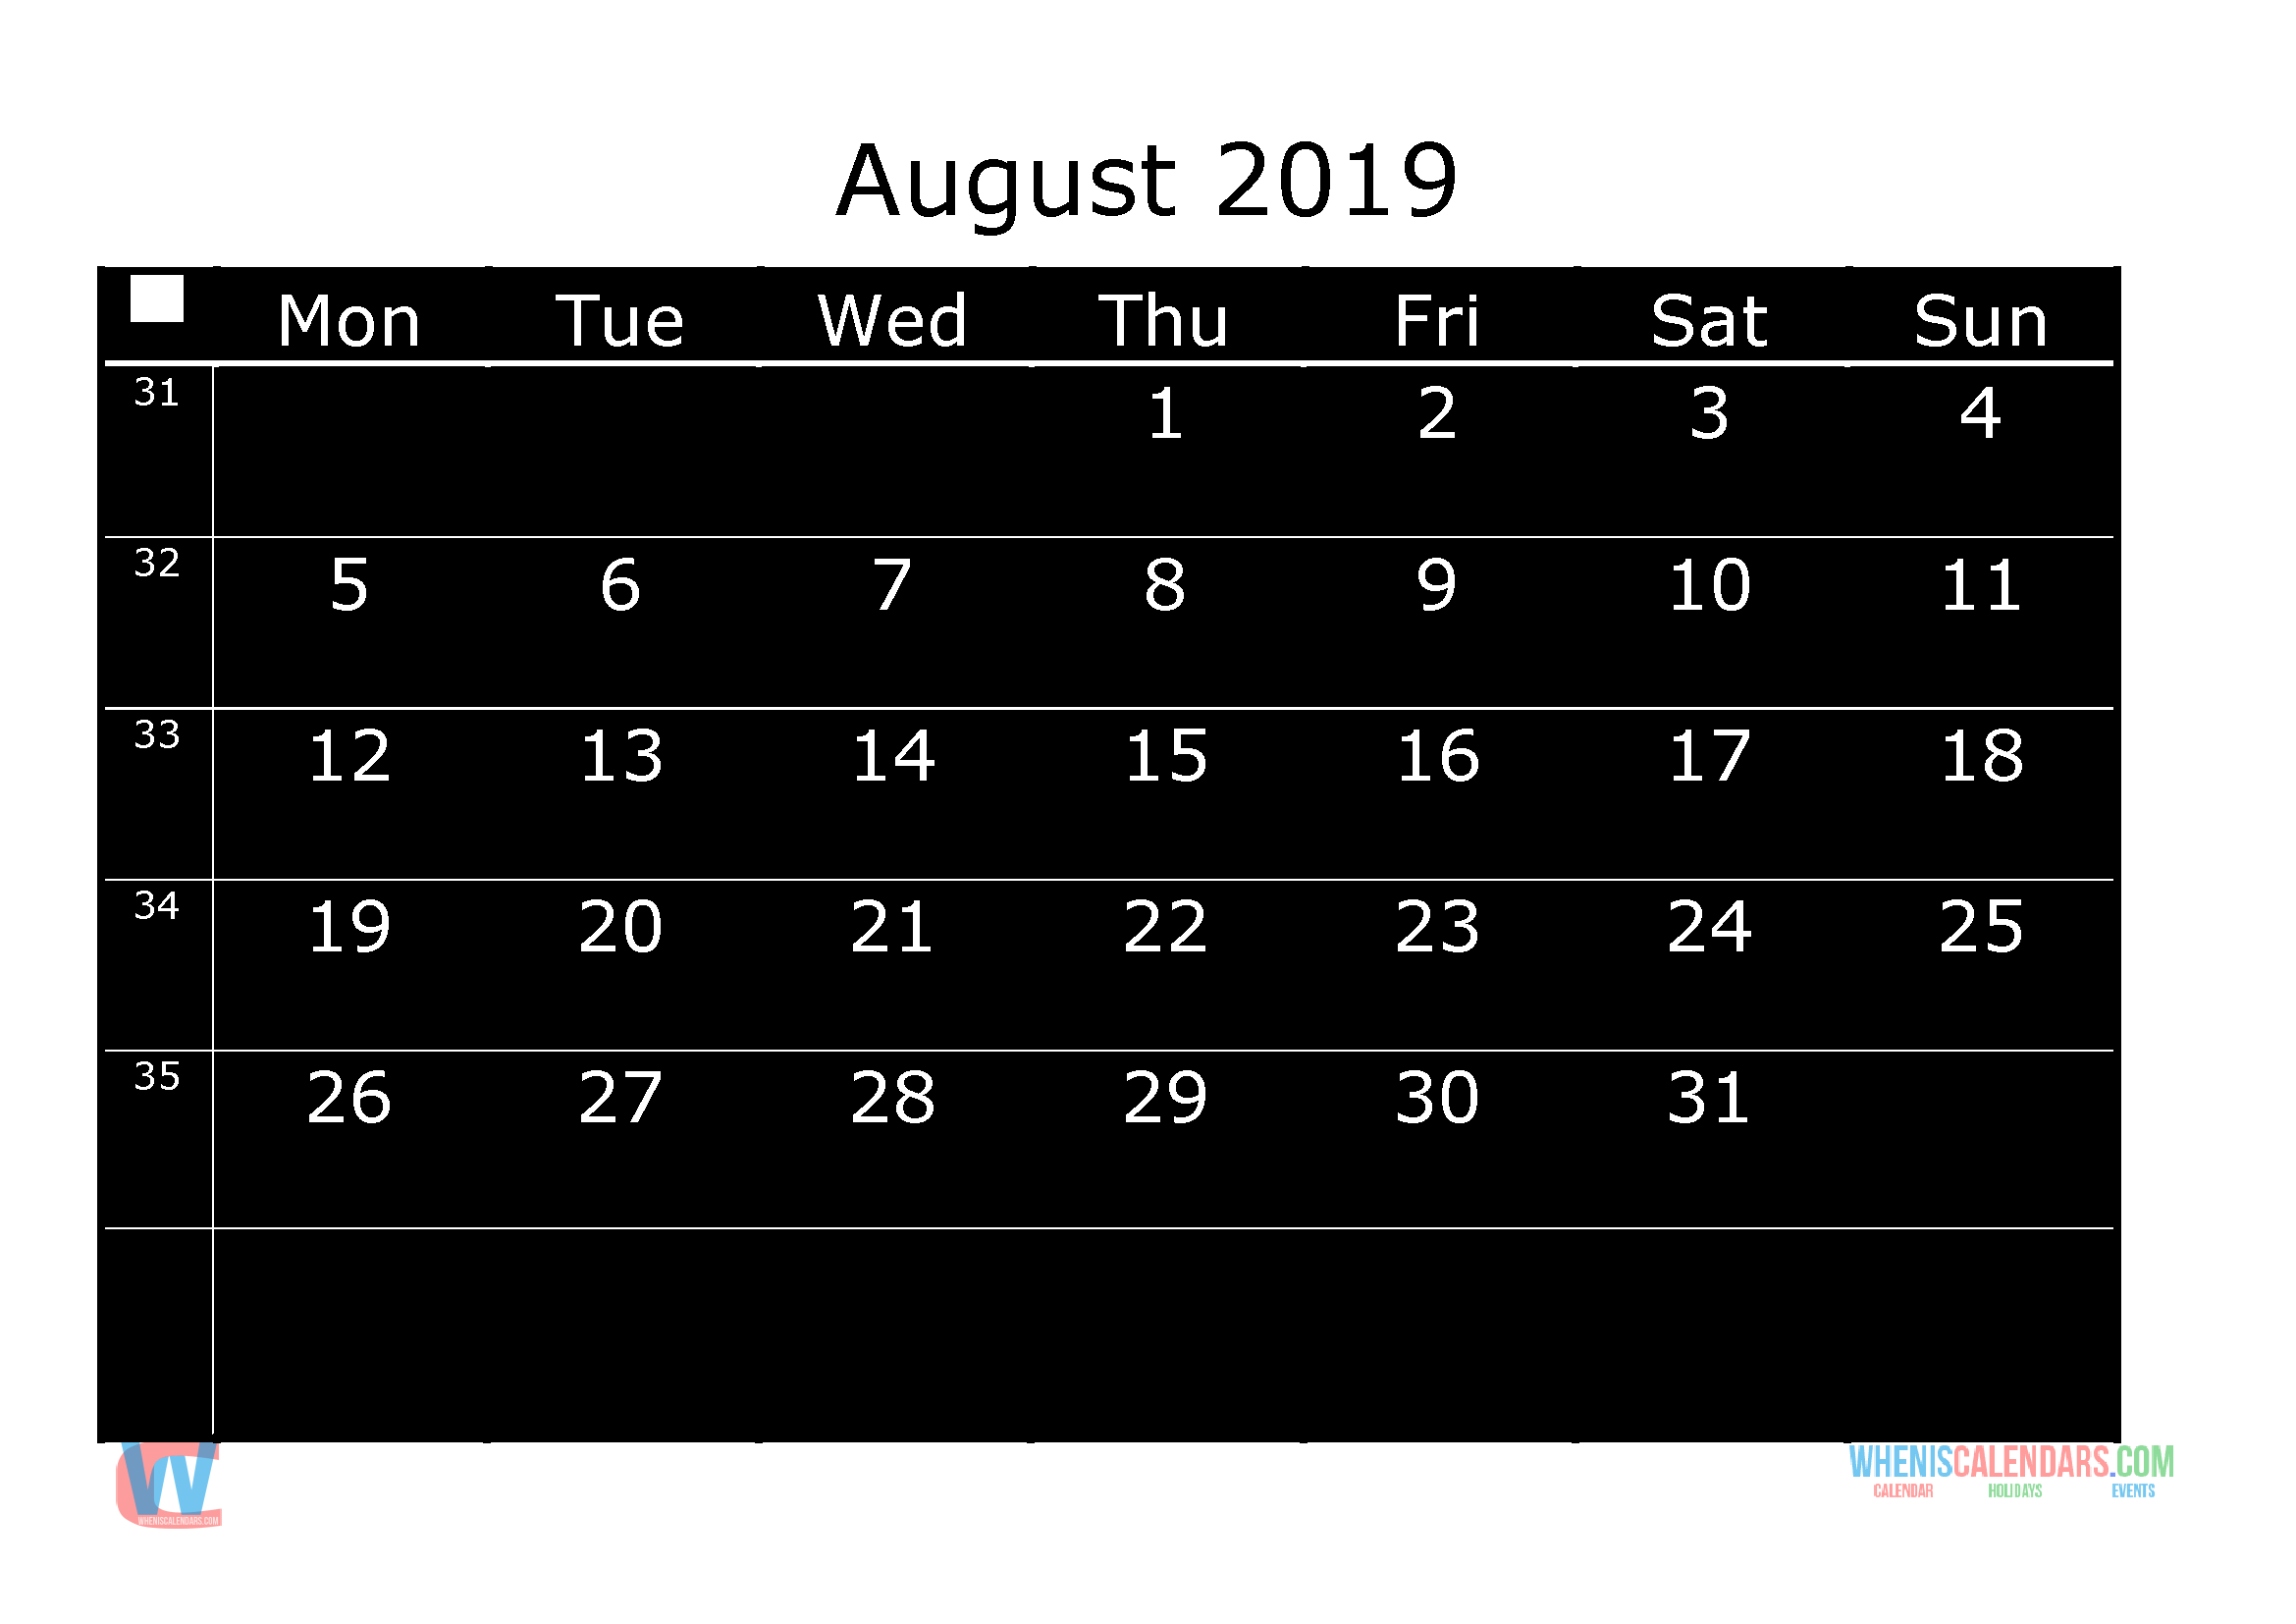 printable-monthly-calendar-2019-august-week-day-starts-monday